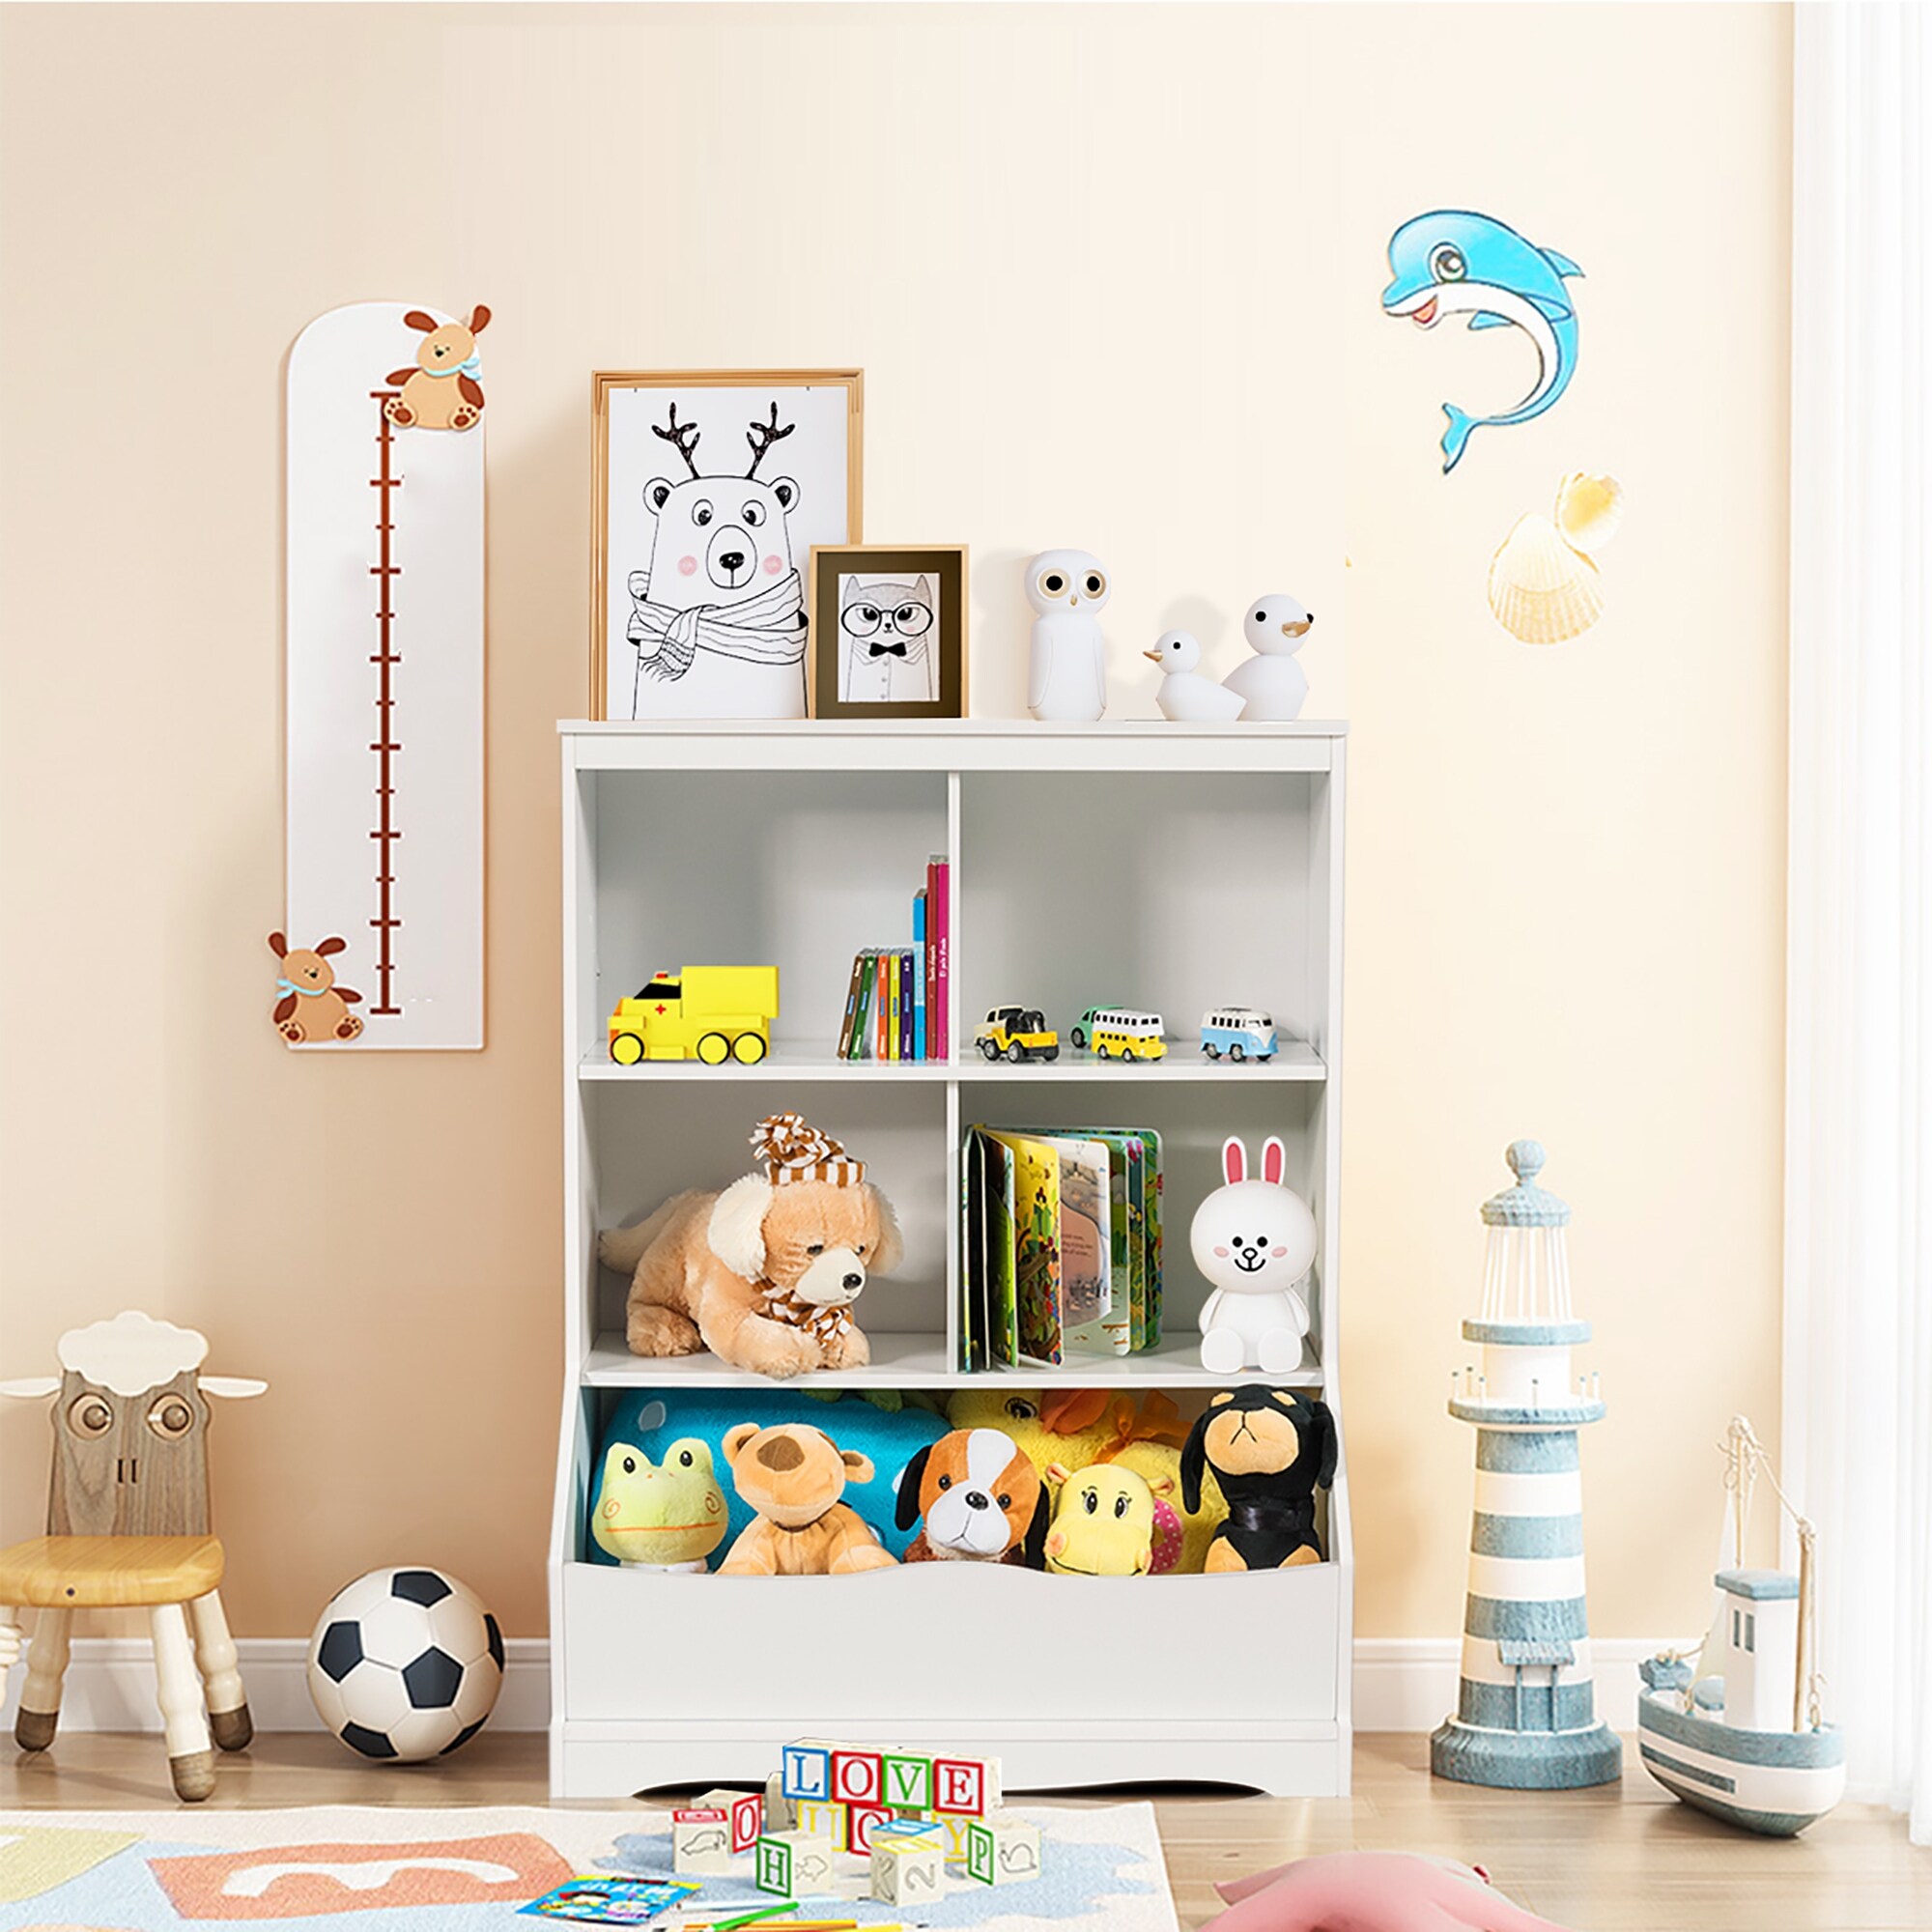 https://ak1.ostkcdn.com/images/products/is/images/direct/04ea6b01c309e80e97269df705afc1c034fc0ed8/Costway-3-Tier-Children%27s-Multi-Functional-Bookcase-Toy-Storage-Bin.jpg